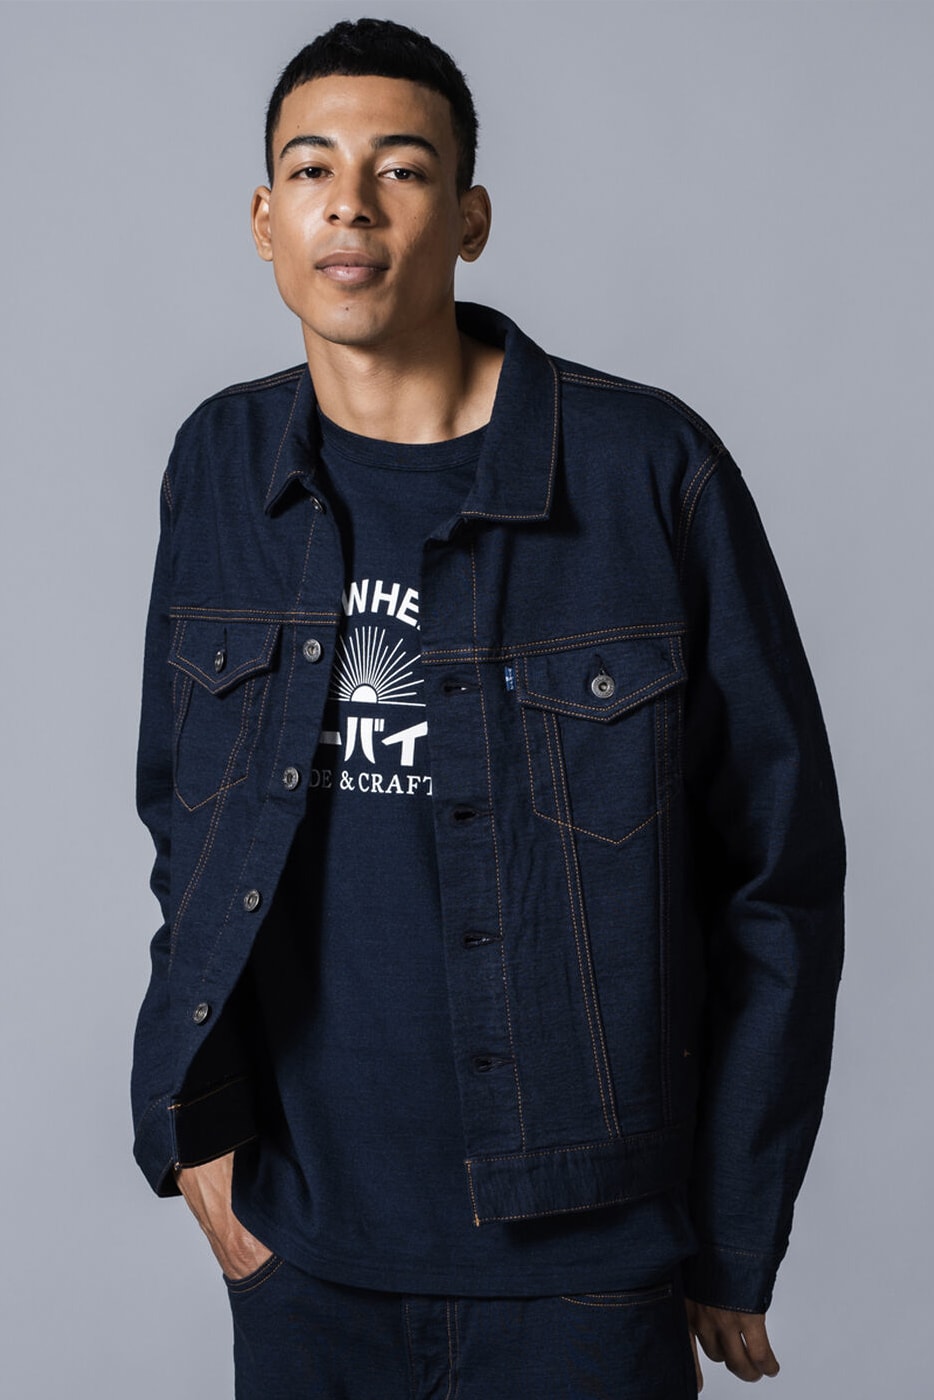 Loopwheeler Levis Made and Crafted Capsule French terry fleece 20th anniversary hanging knitting machine 502 trucker jacket navy candy dyeing made in japan